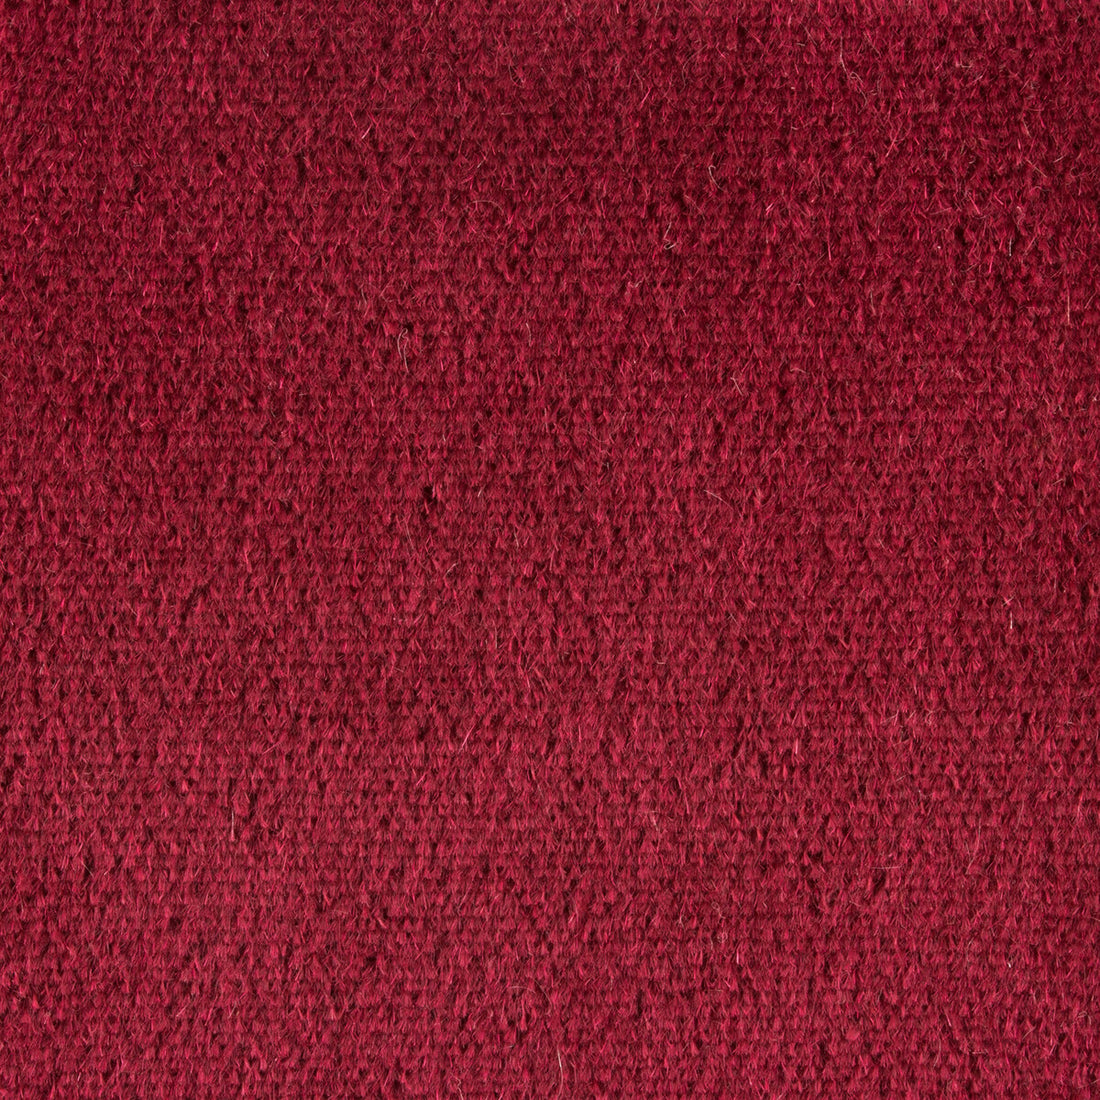 Plazzo Mohair fabric in rhubarb color - pattern 34259.174.0 - by Kravet Couture